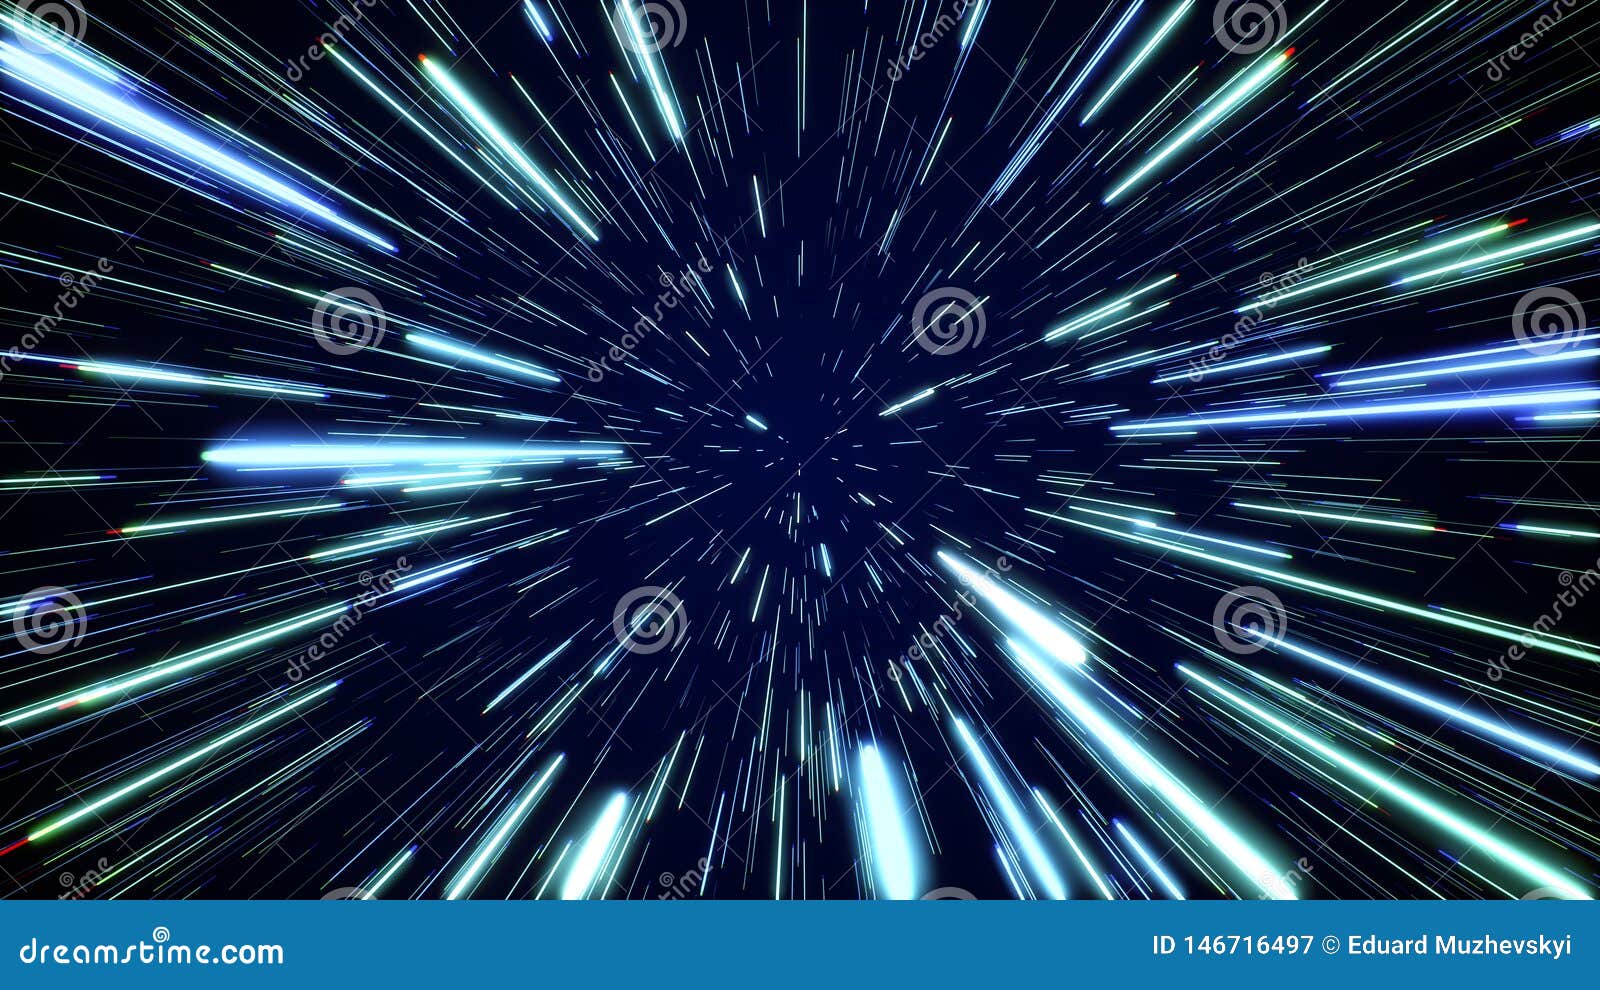 hyperspace jump through the stars to a distant space. speed of light, neon rays